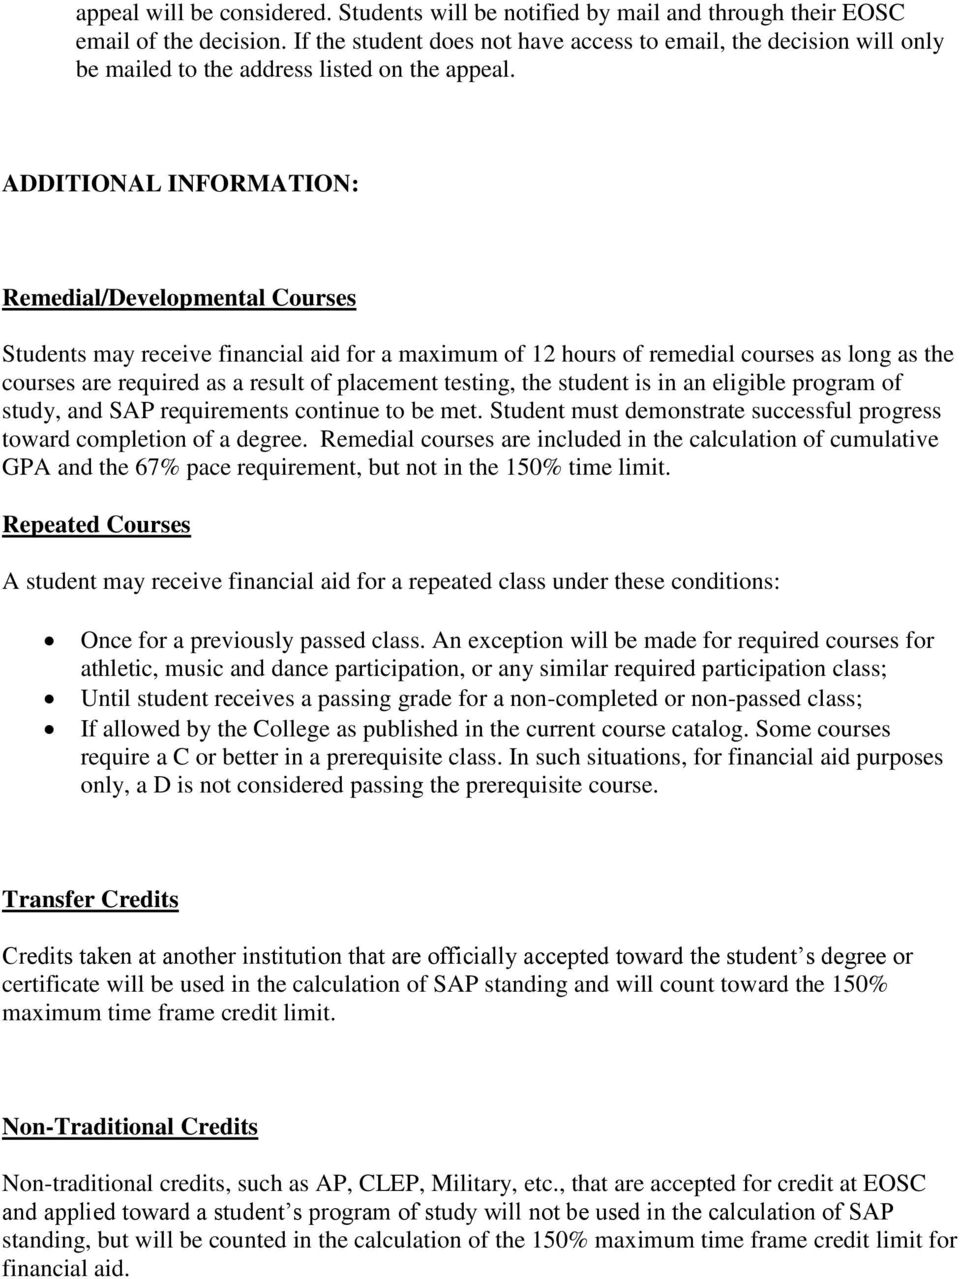 ADDITIONAL INFORMATION: Remedial/Developmental Courses Students may receive financial aid for a maximum of 12 hours of remedial courses as long as the courses are required as a result of placement